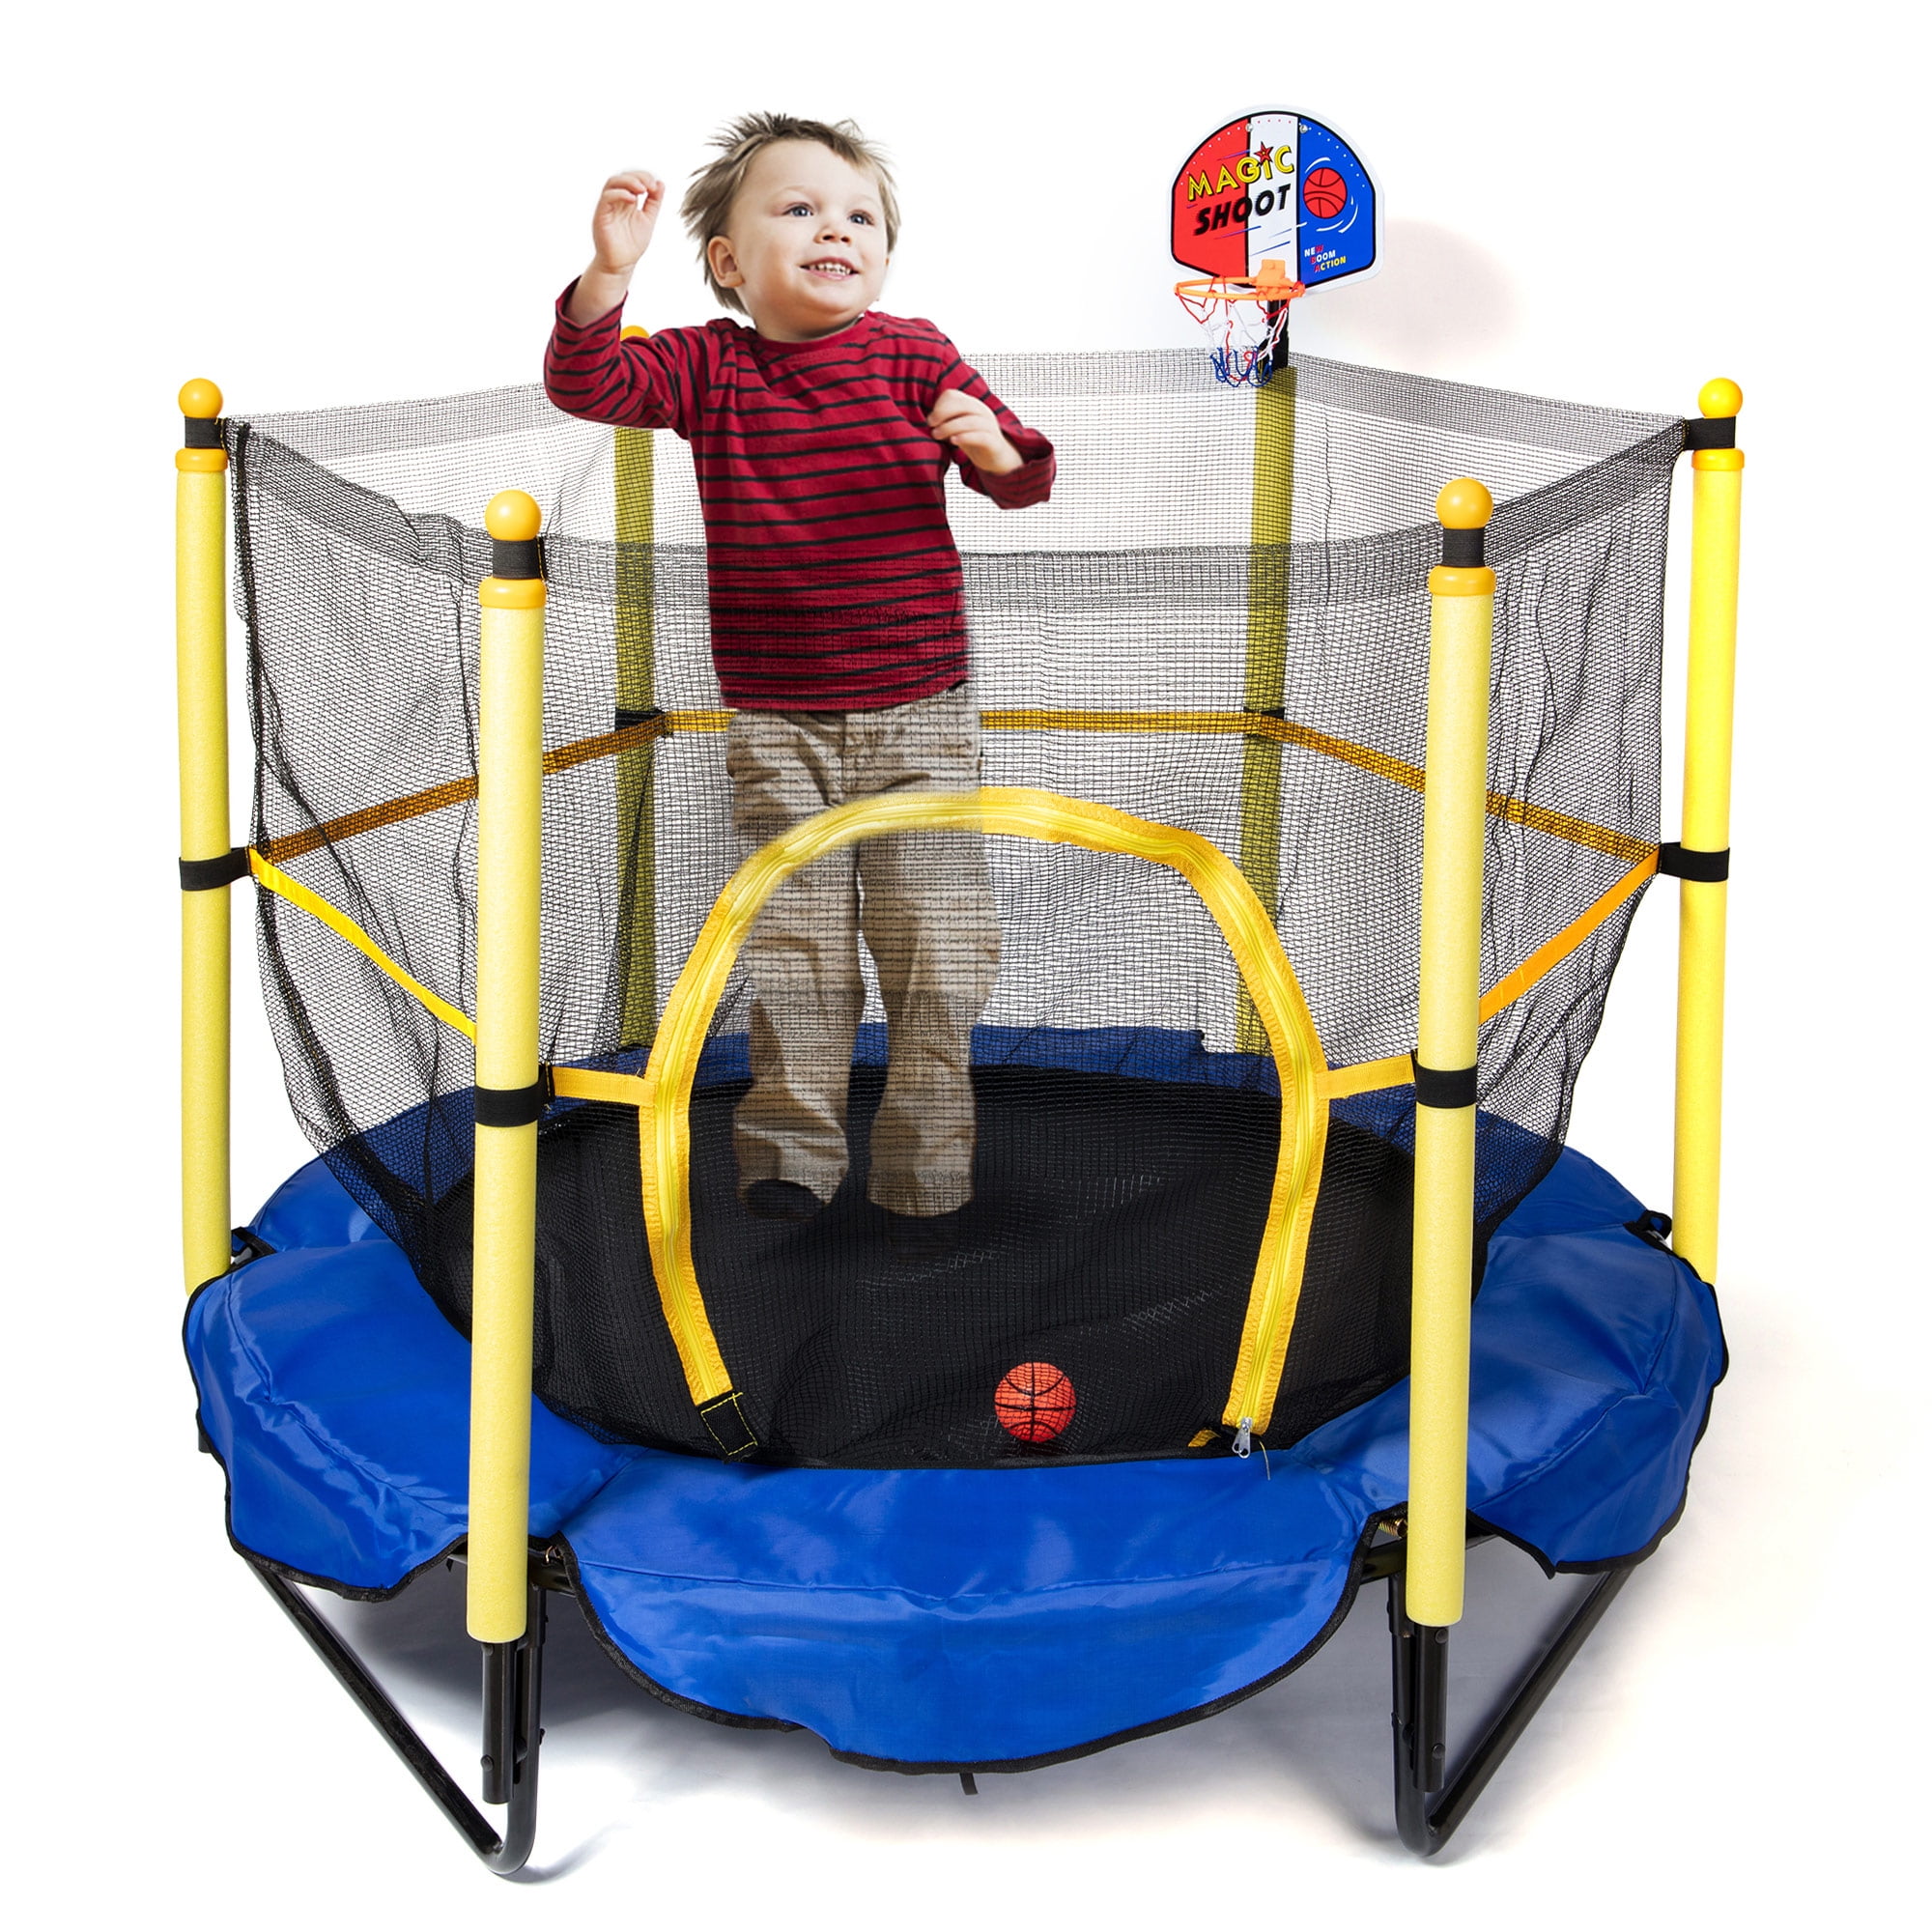 Zupapa 54 inch Indoor Small Trampoline for Kids Children Ultra Quiet Mini Toddler Baby Trampoline with Enclosure Net Bungee Cords Trampoline with Flower Modelling 